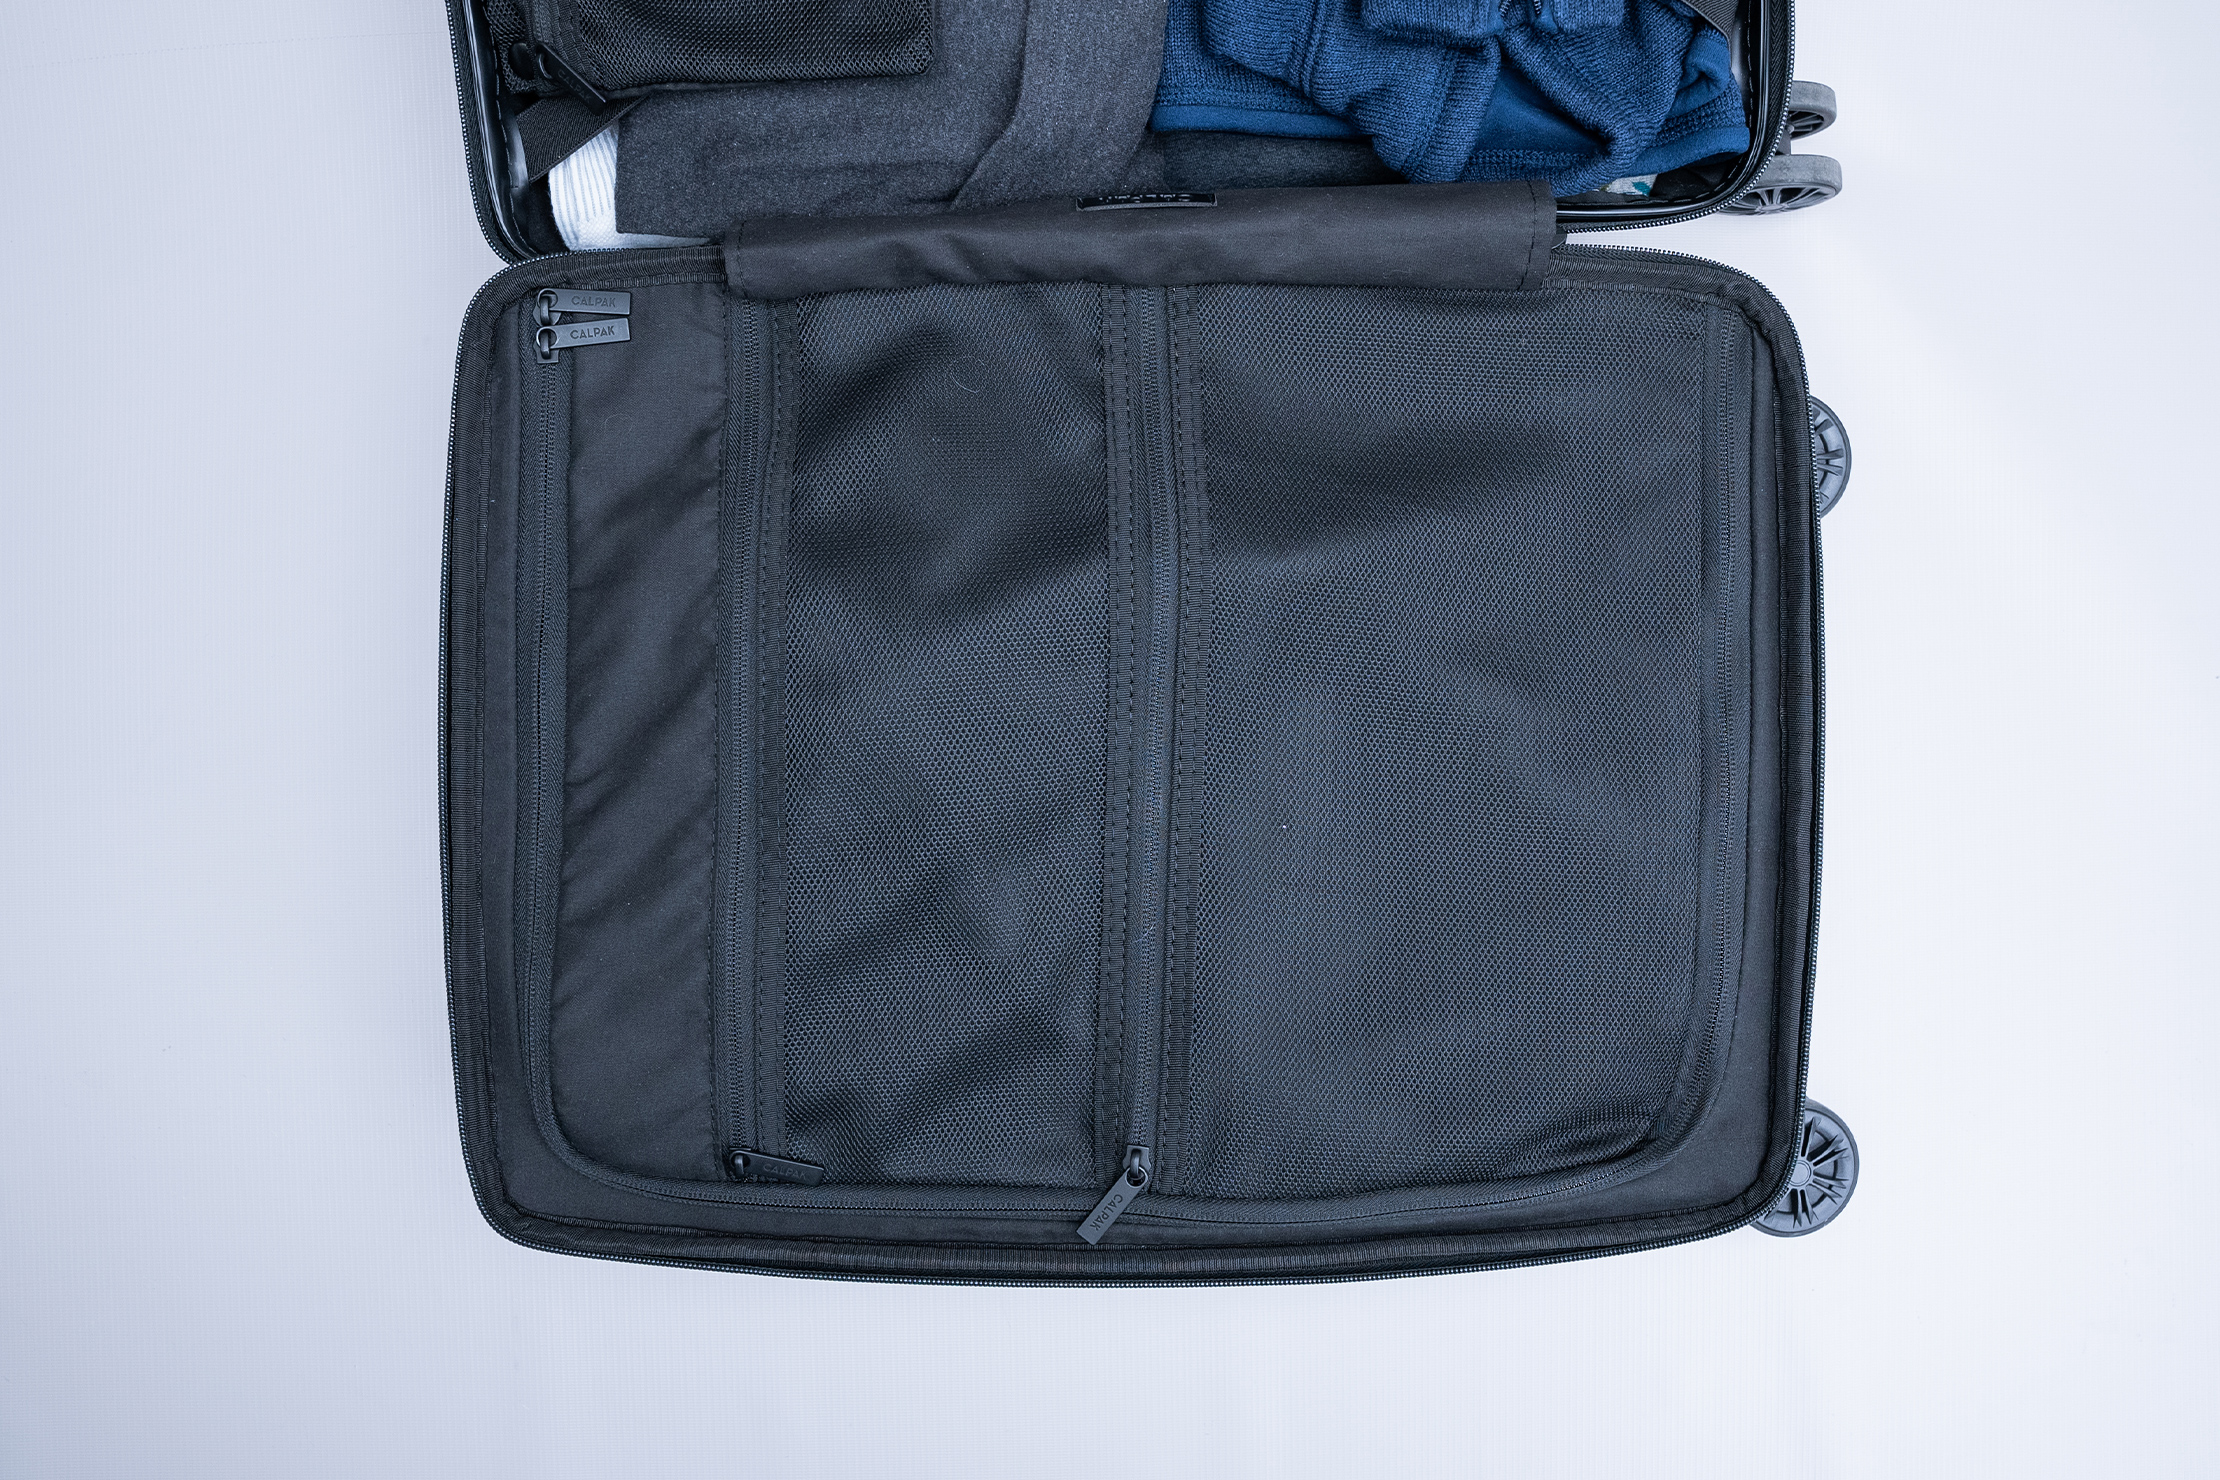 Calpak Ambeur Carry-On Luggage Zippered Side